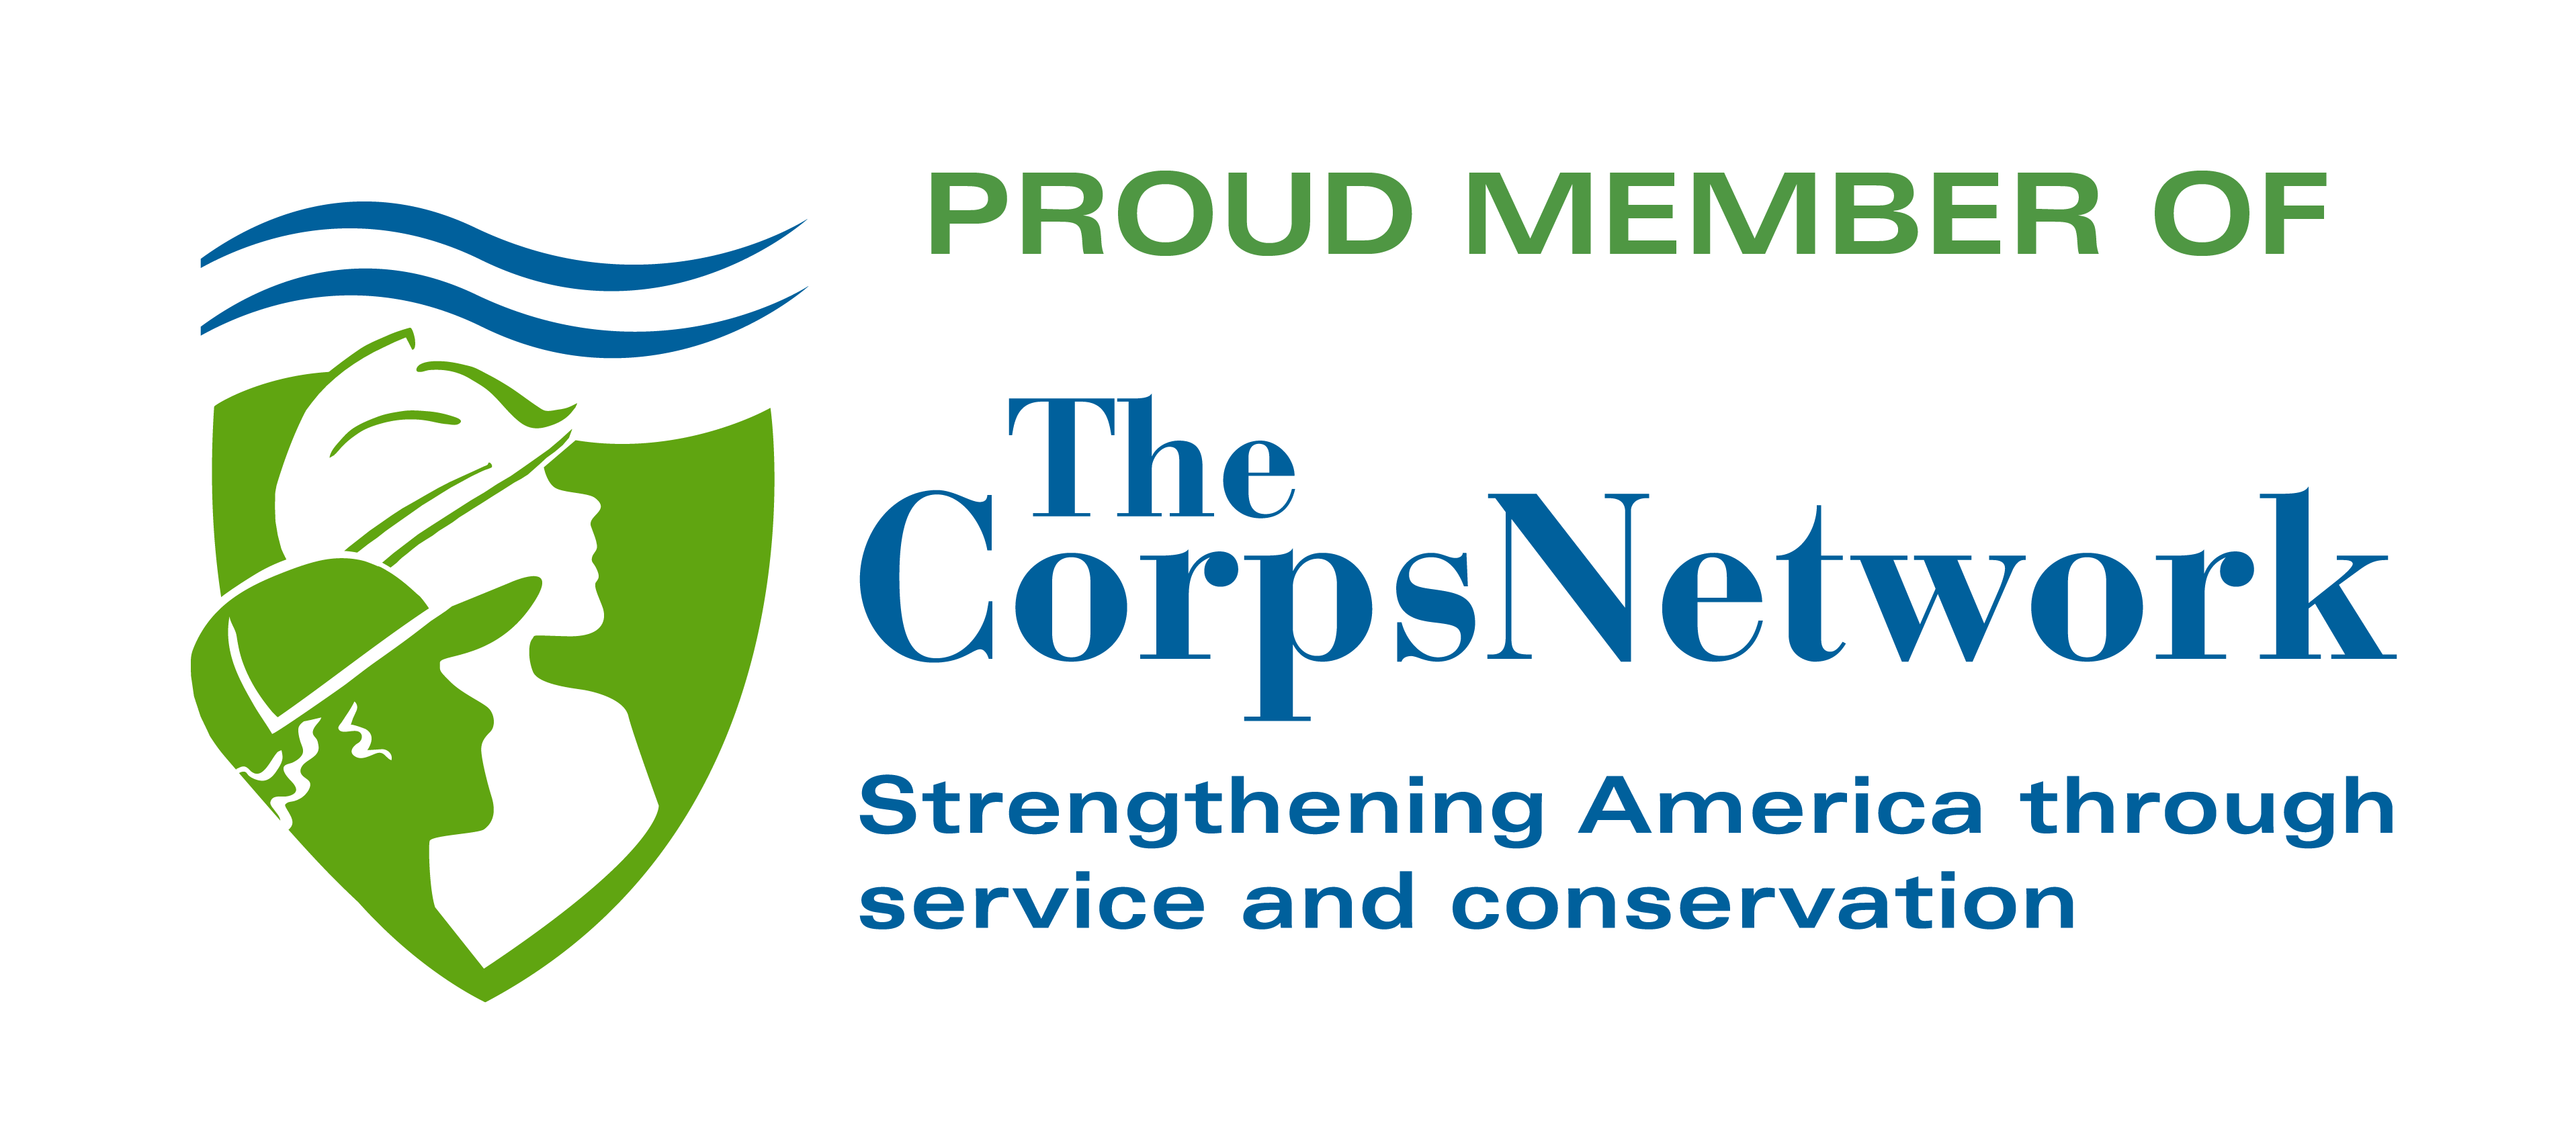 The Corps Network logo. Reads: Proud member of The Corps Network, strengthening America through service and conservation.